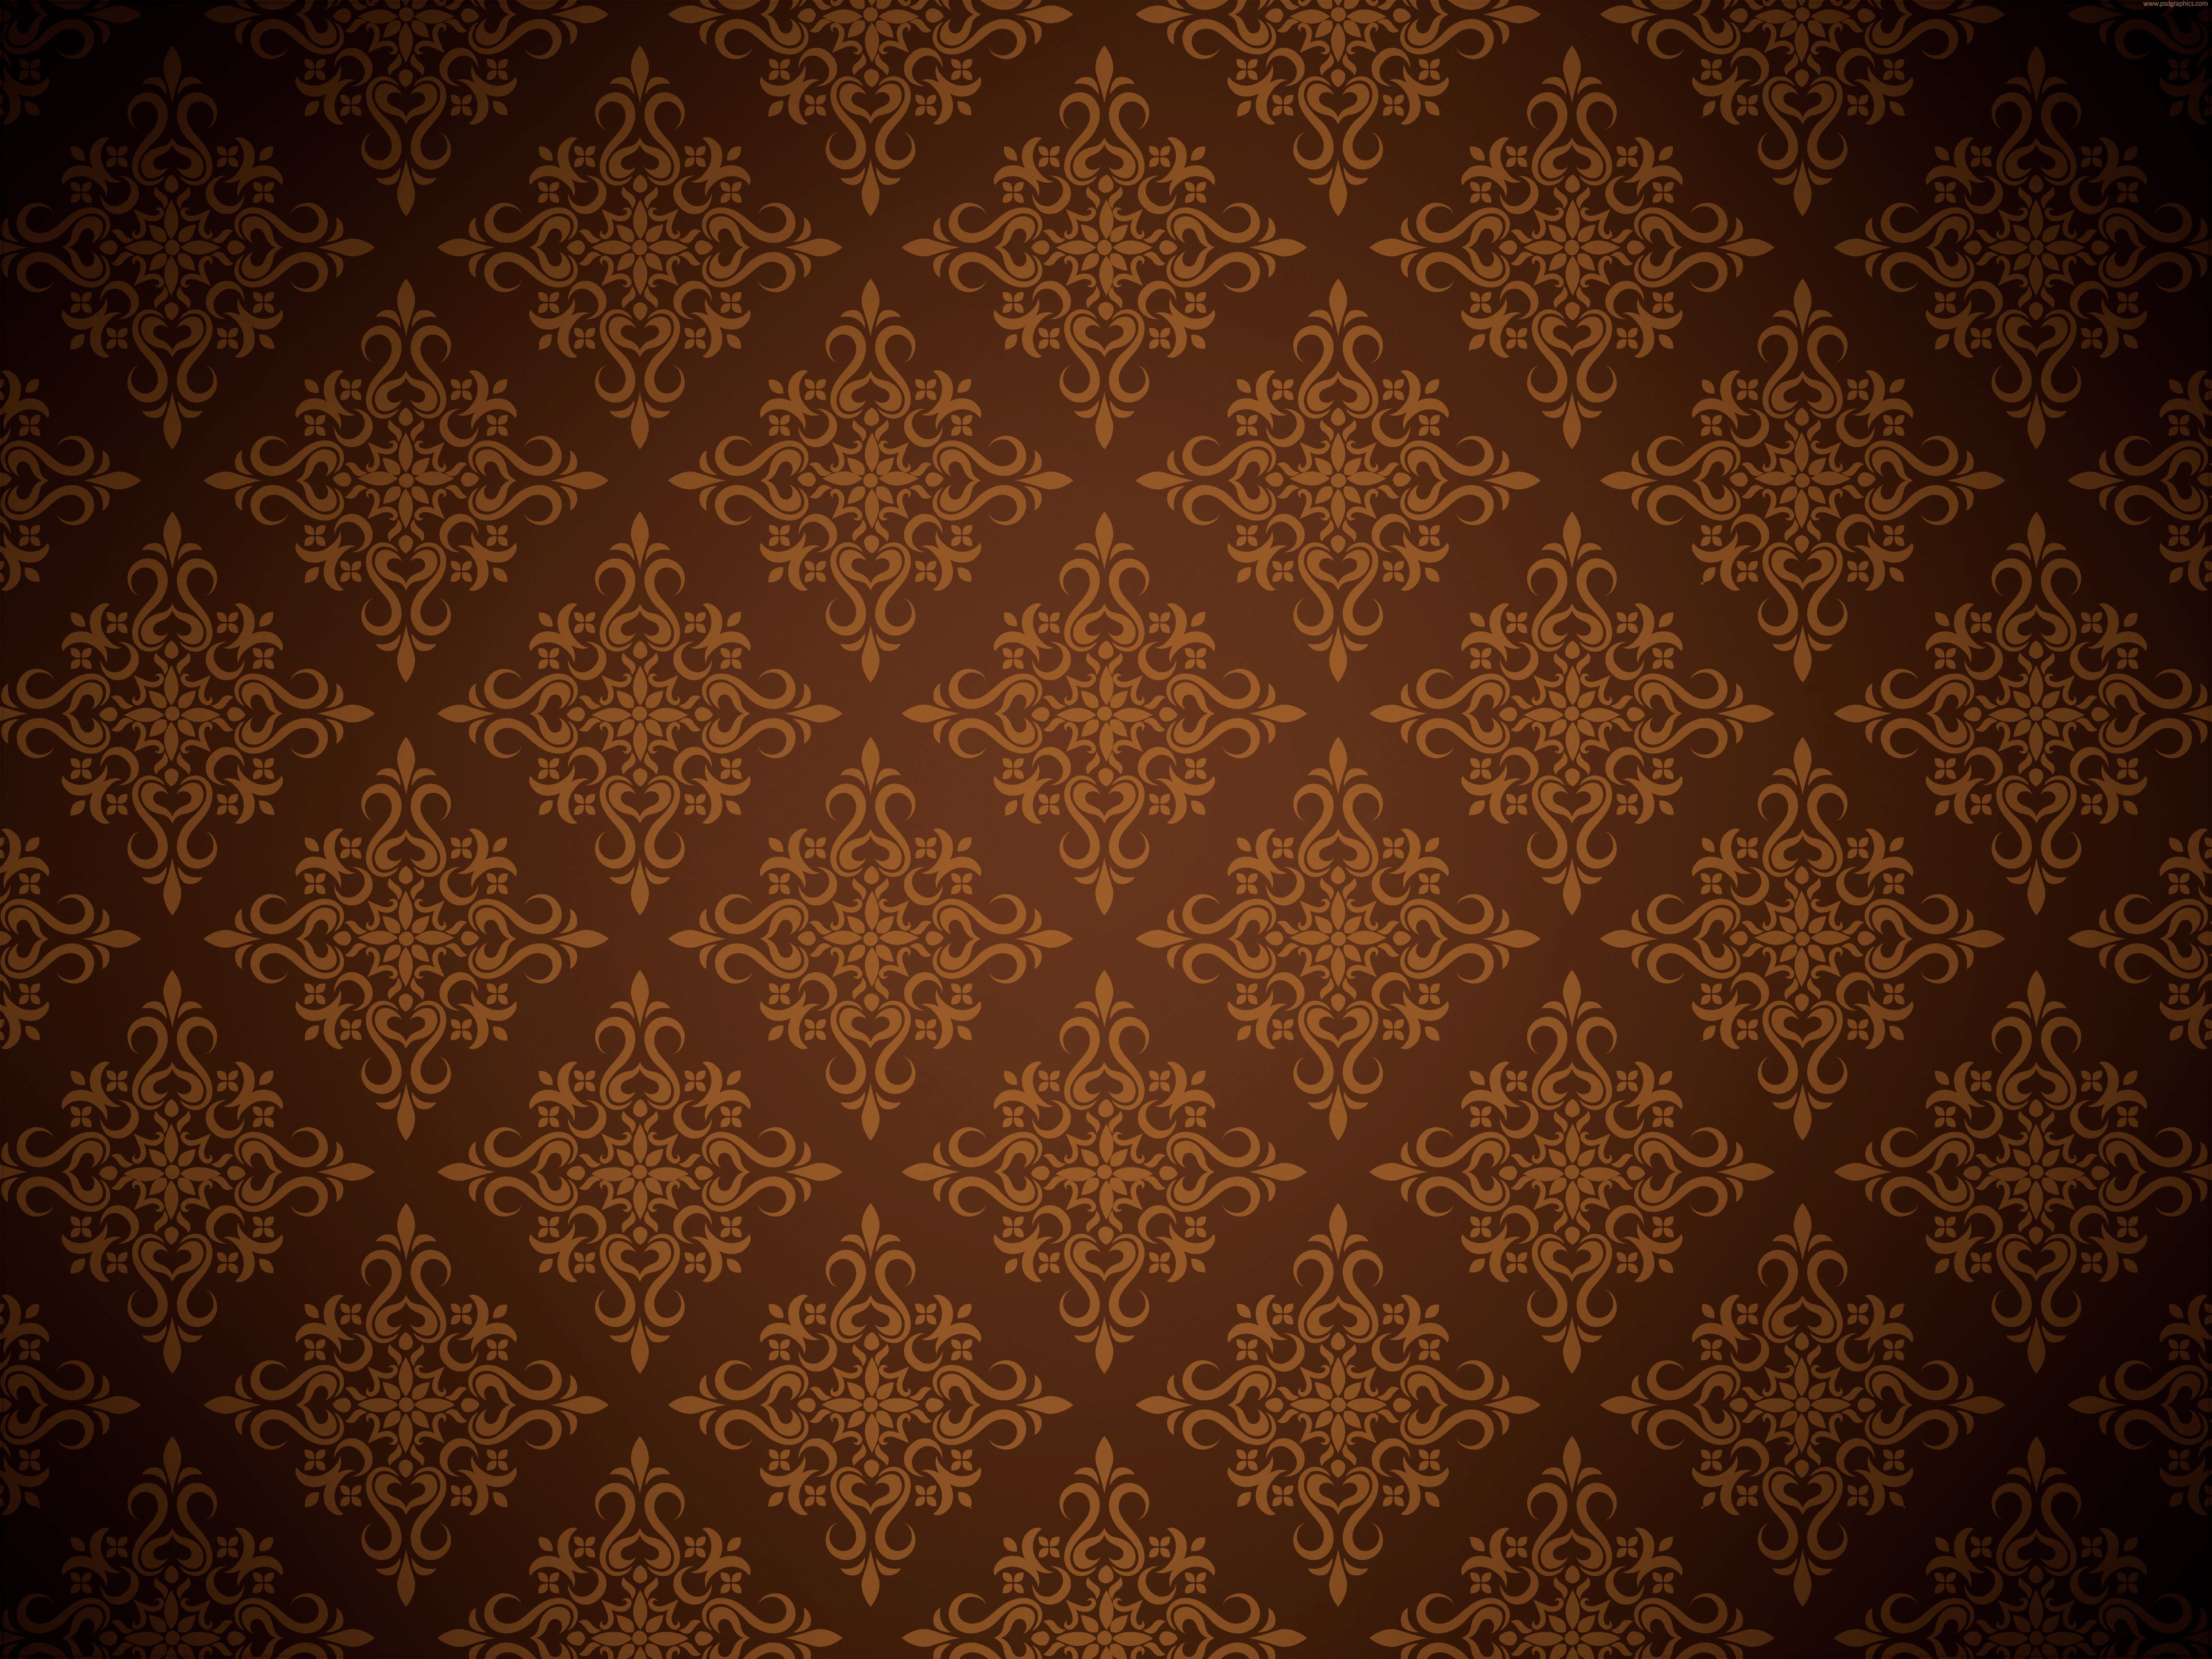 background 9474 | Backgrounds | Pinterest | Brown floral and ...